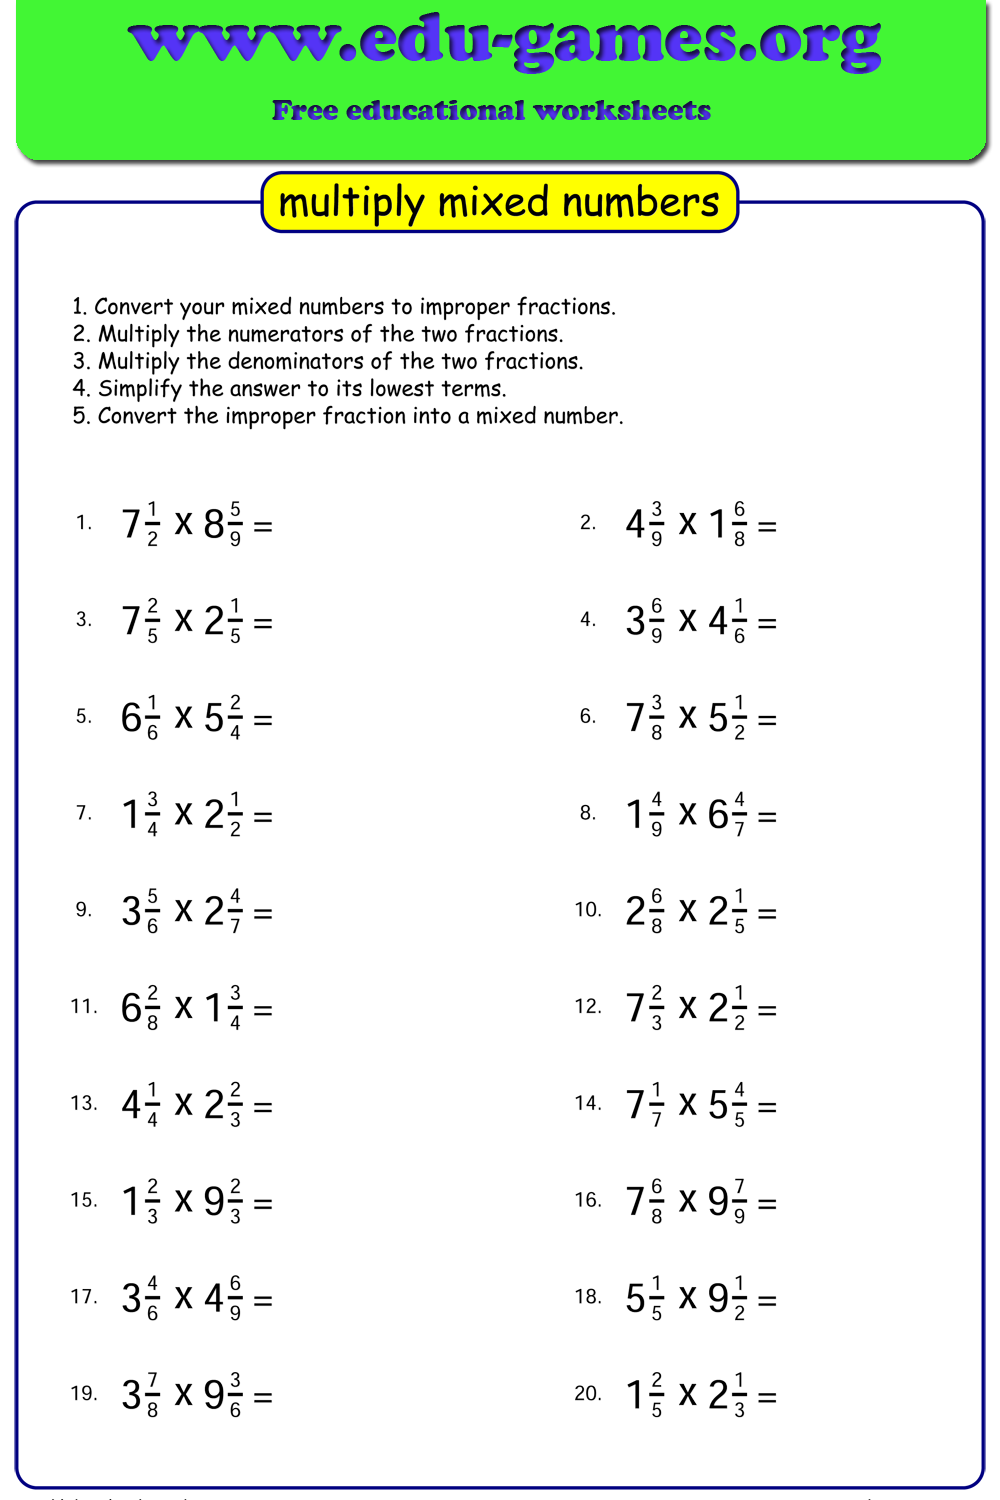 Free Multiplying Mixed Numbers Worksheets For Multiplying Mixed Numbers Worksheet